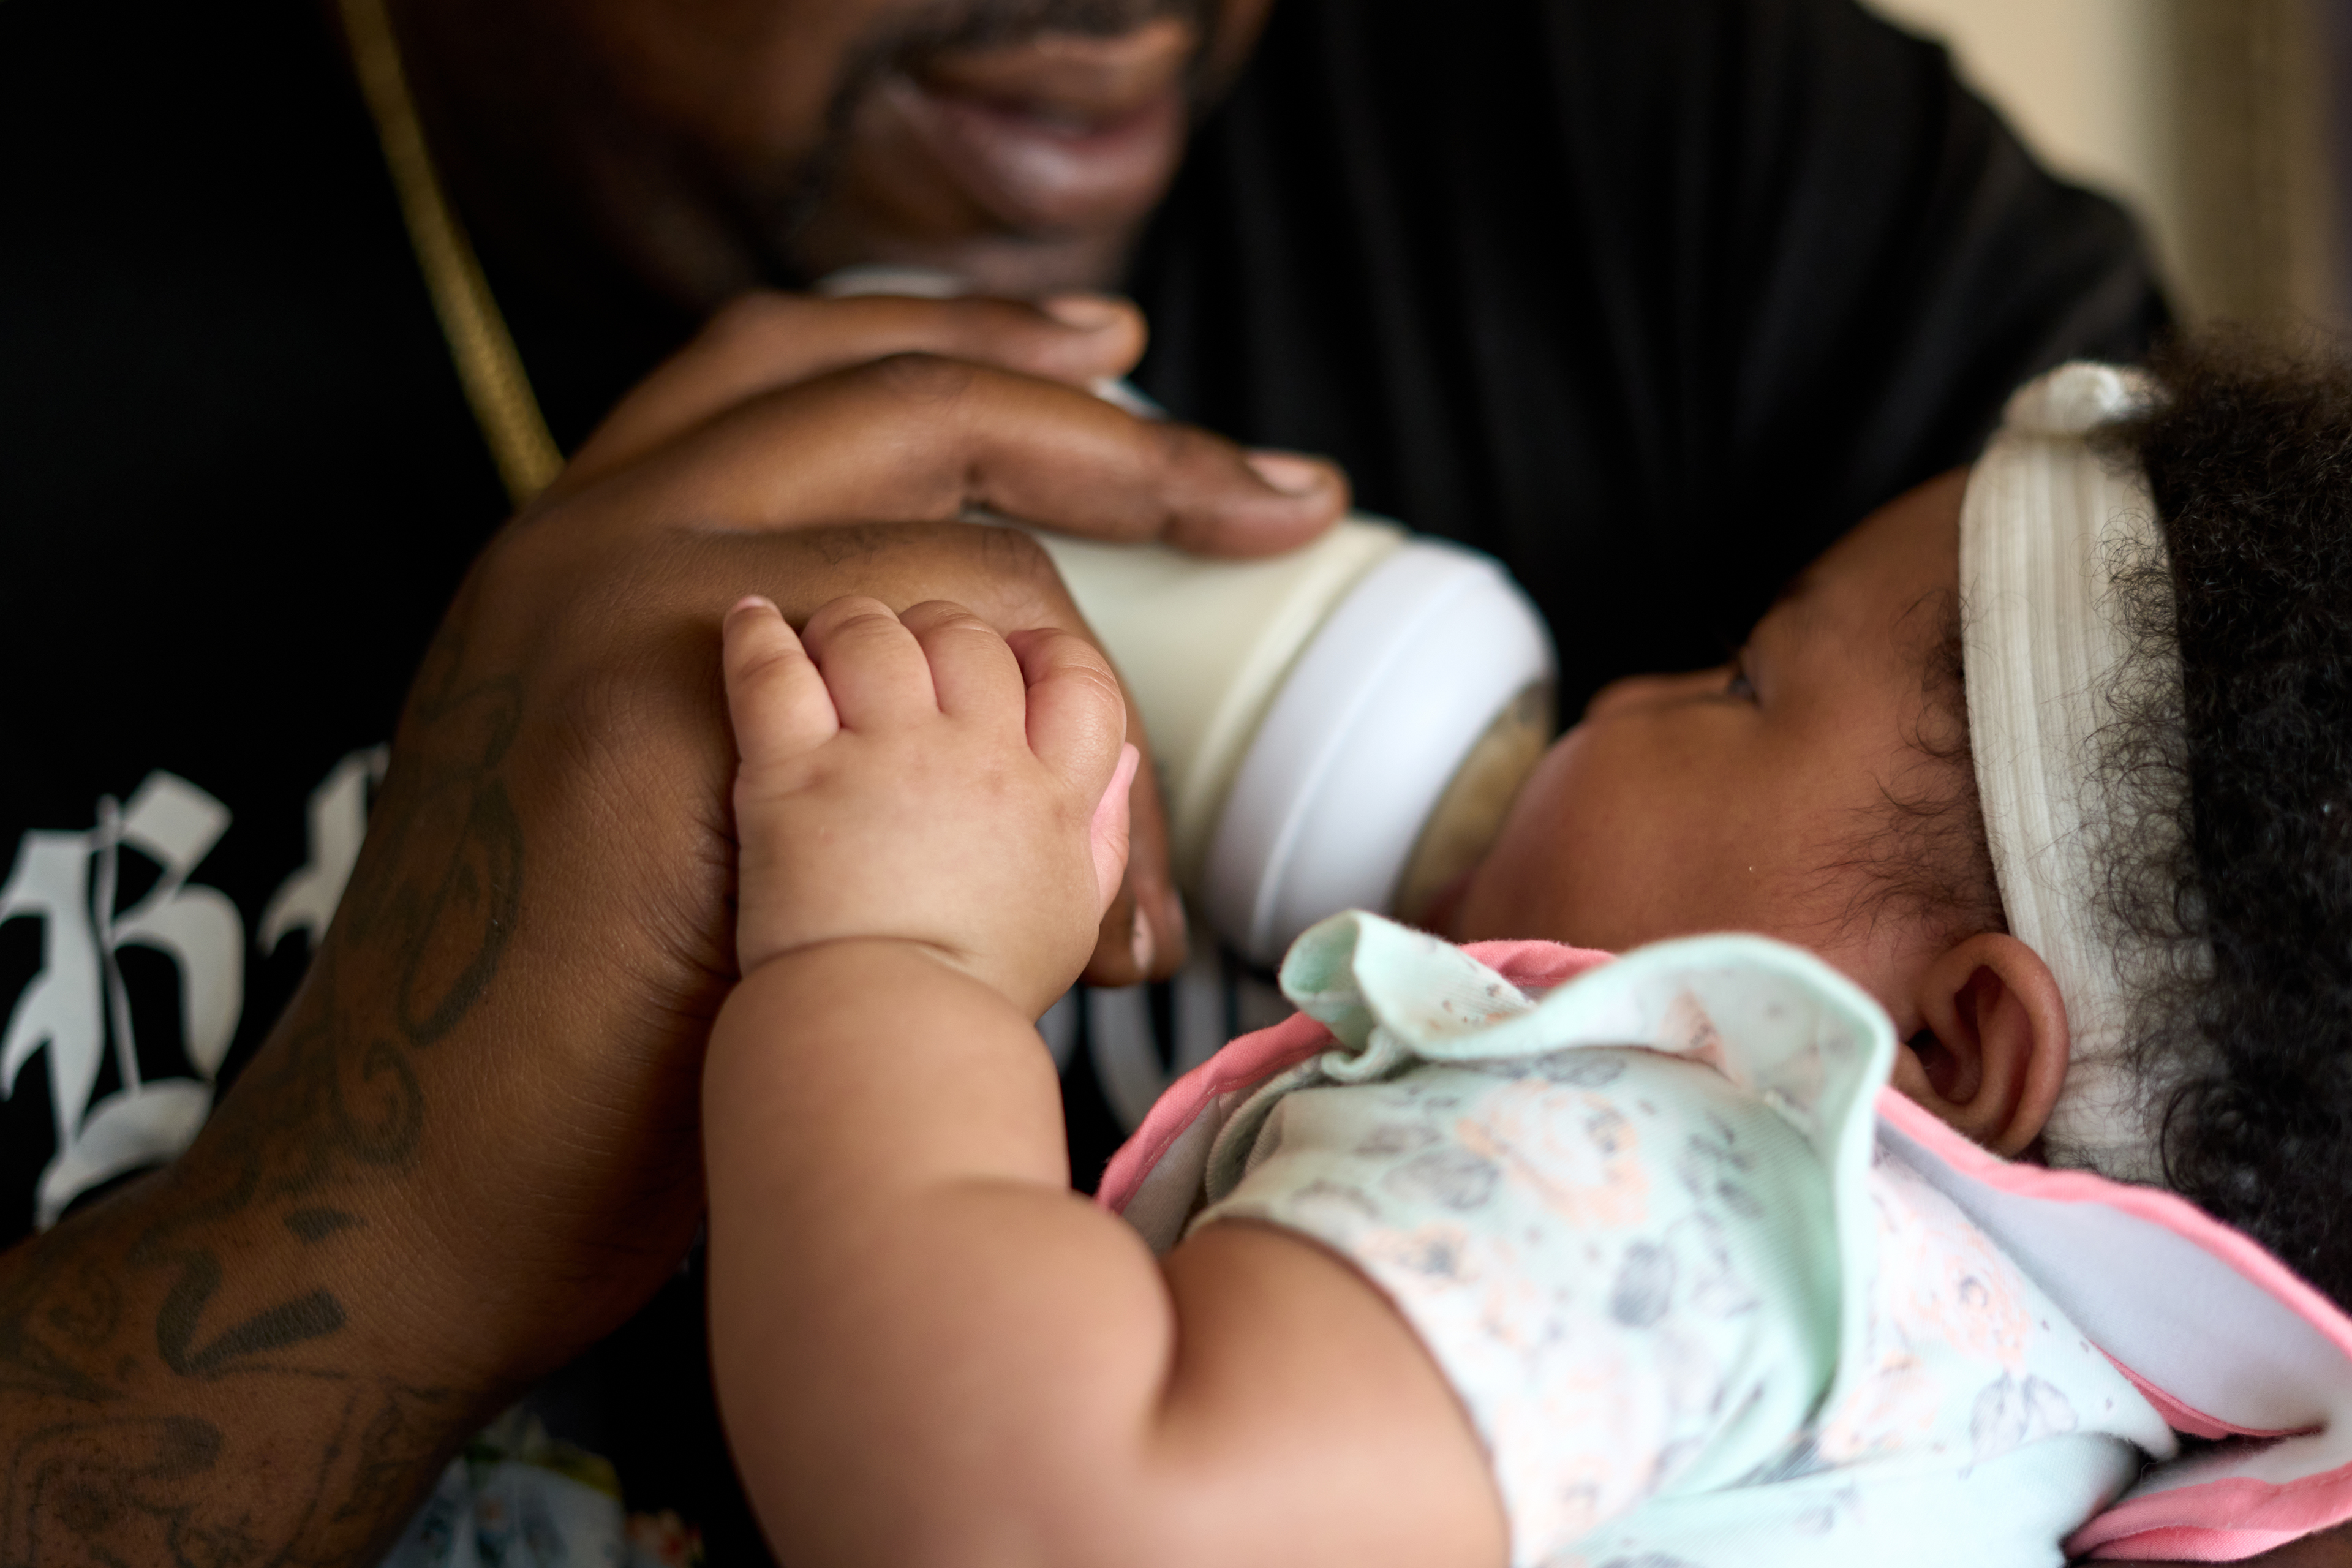 A father cradles his baby daughter and feeds her from a bottle. He is wearing a black t-shirt and she is wearing a white bow headband around her black curly hair.